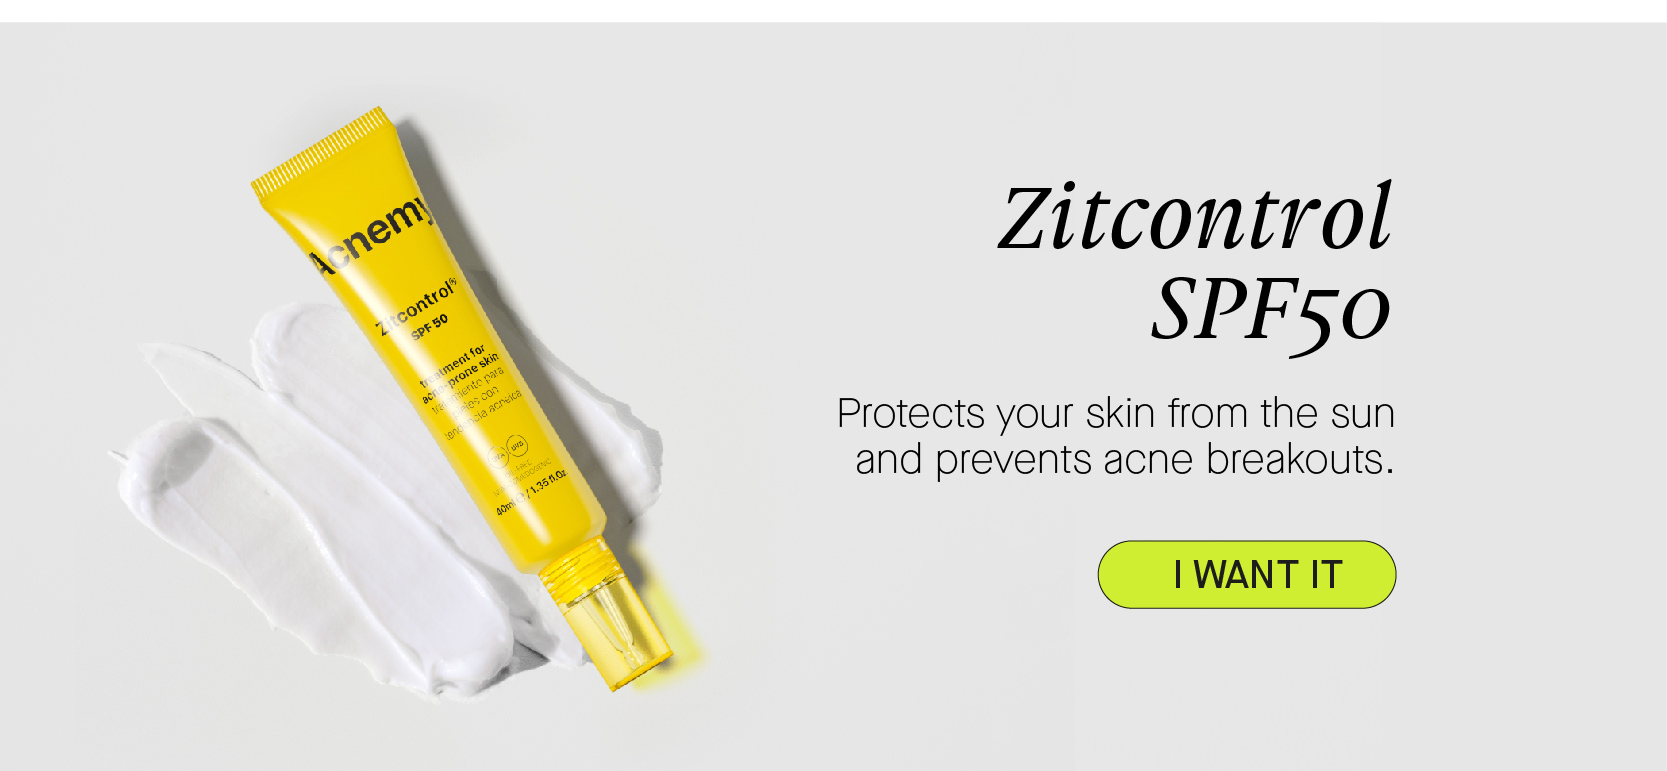 Zitcontrol SPF50 Protects your skin from the sun and prevents acne breakouts. 